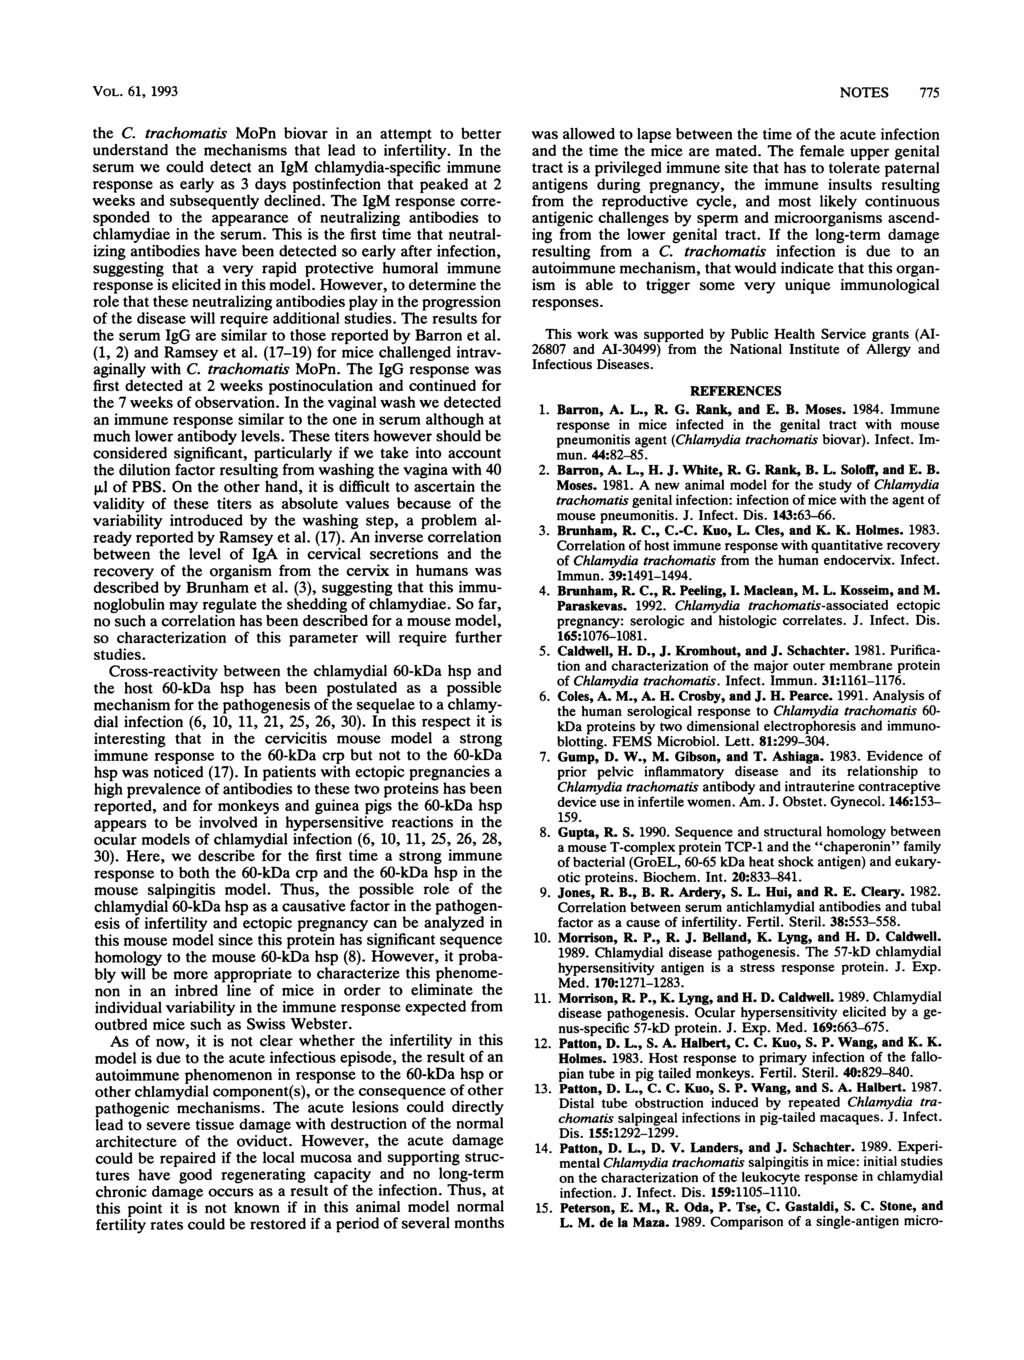 VOL. 61, 1993 the C. trachomatis MoPn biovar in an attempt to better understand the mechanisms that lead to infertility.